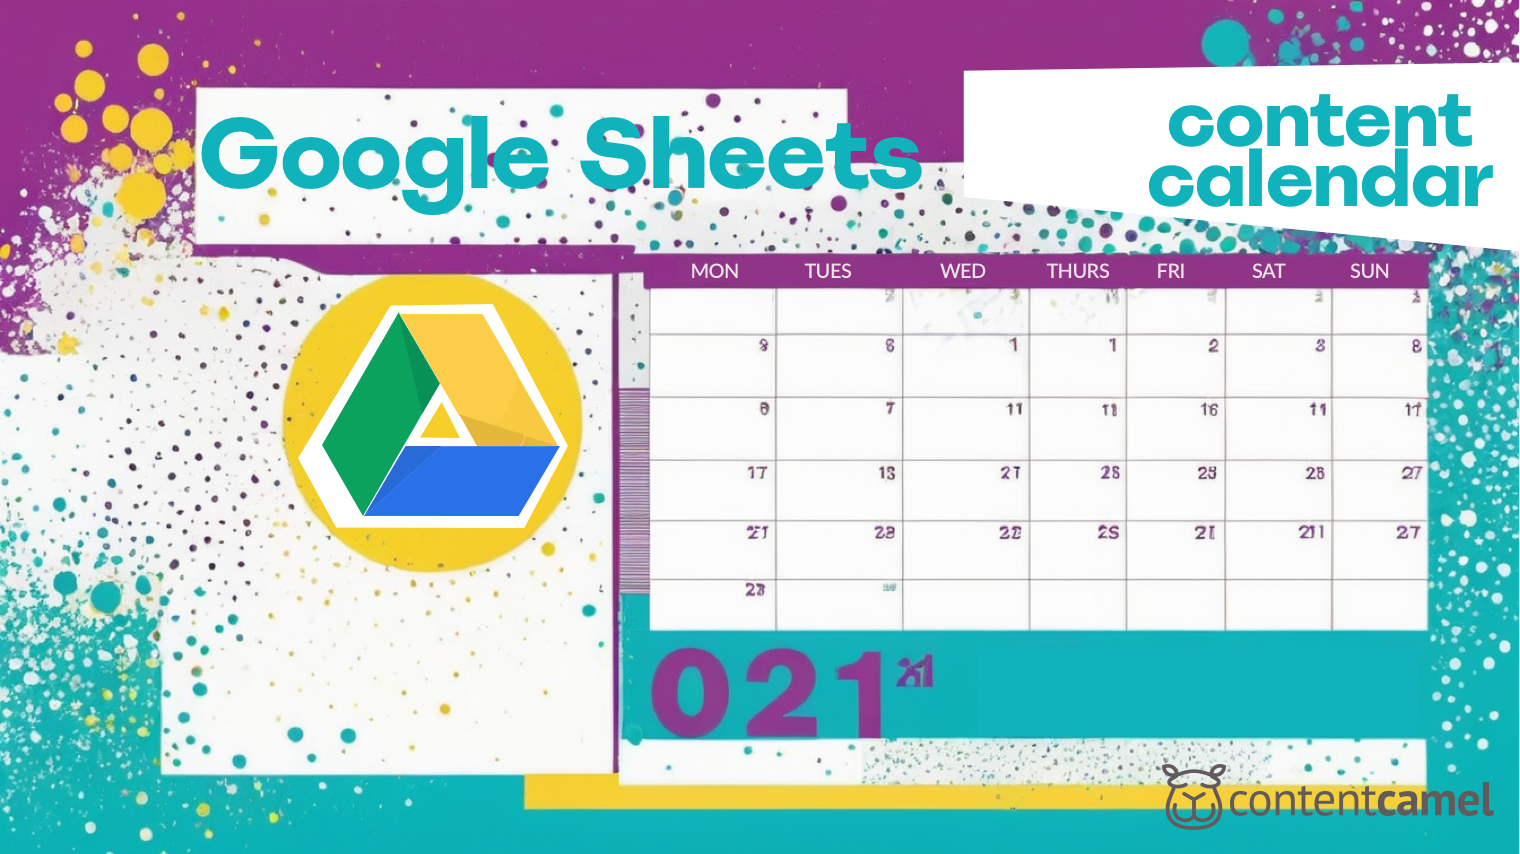 How to Build a Robust Content Calendar with Google Sheets